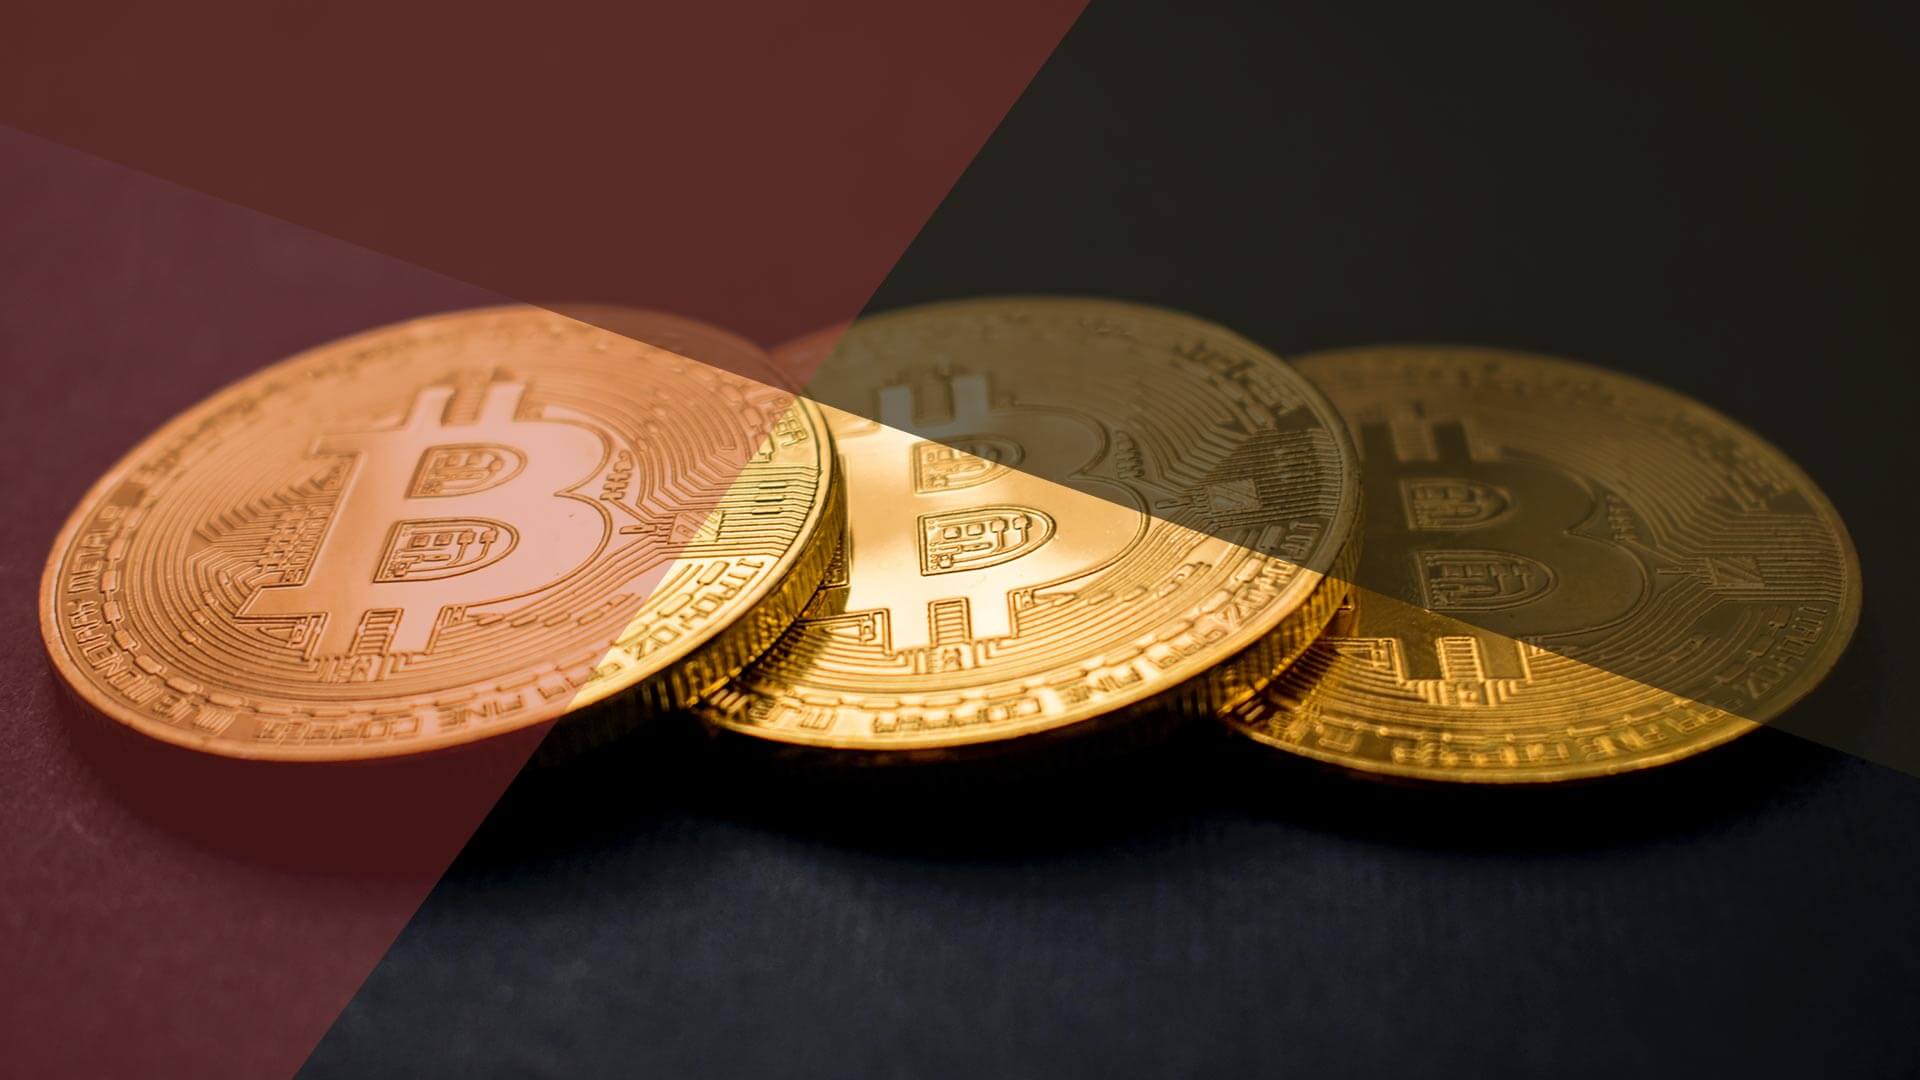 Q&A: Should I invest in Bitcoin? - LifeGuide